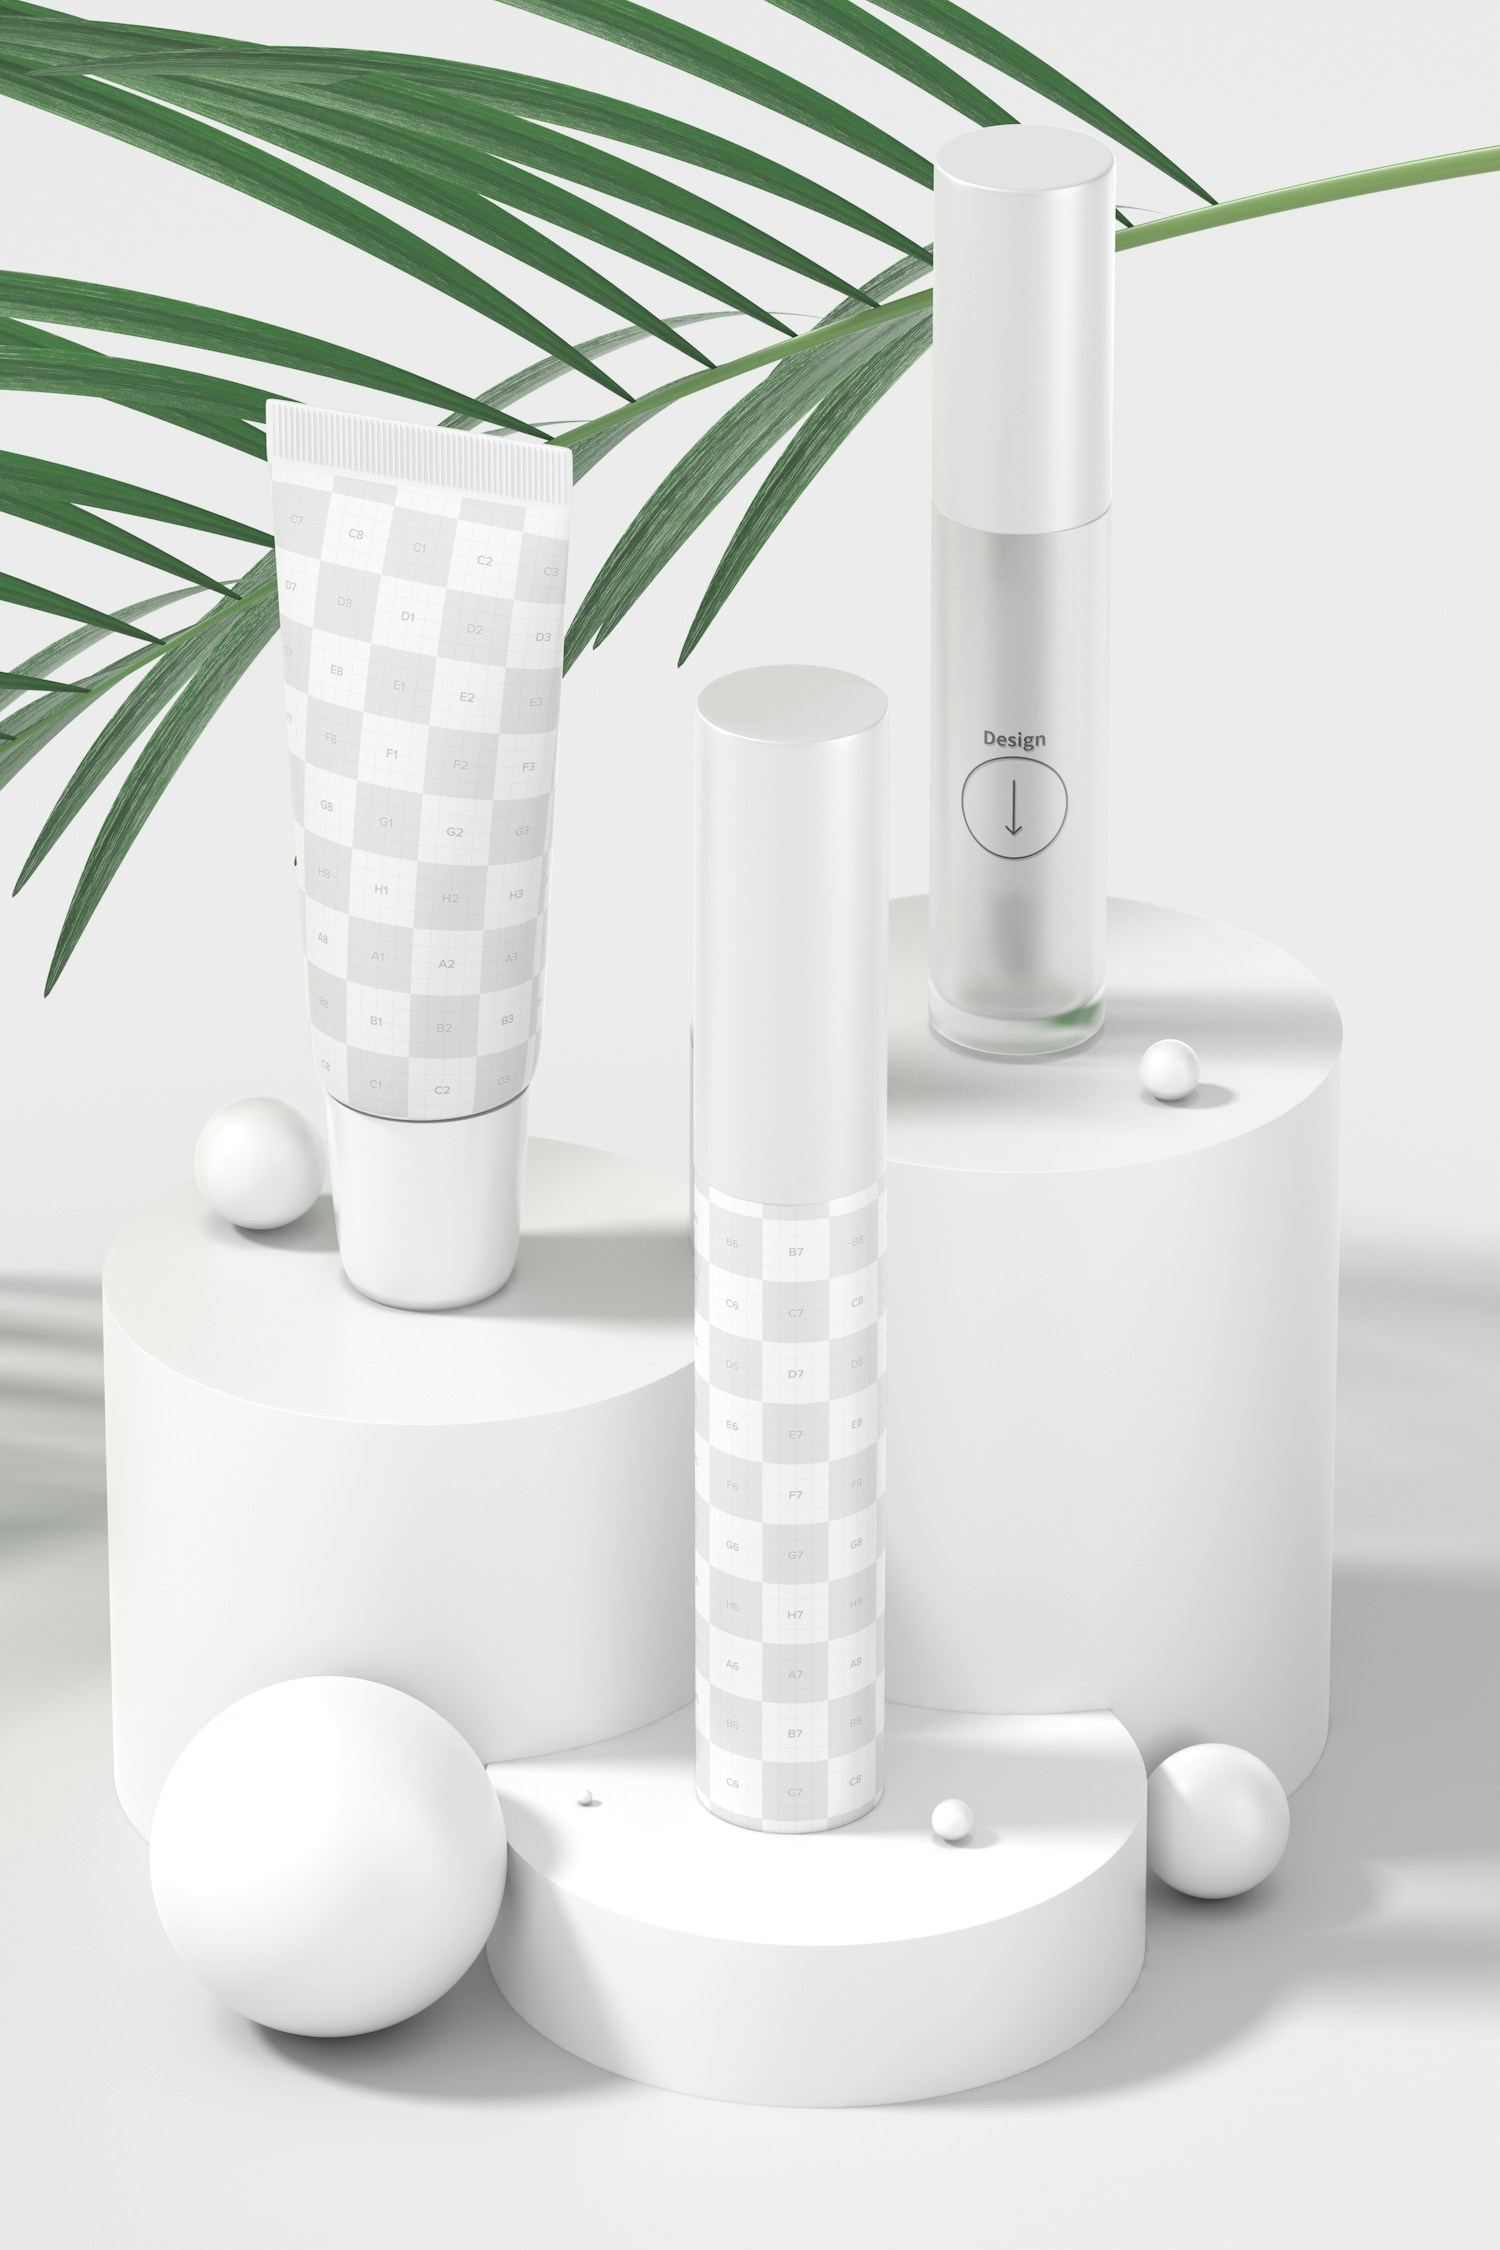 Lip Products Scene Mockup, Perspective View 02